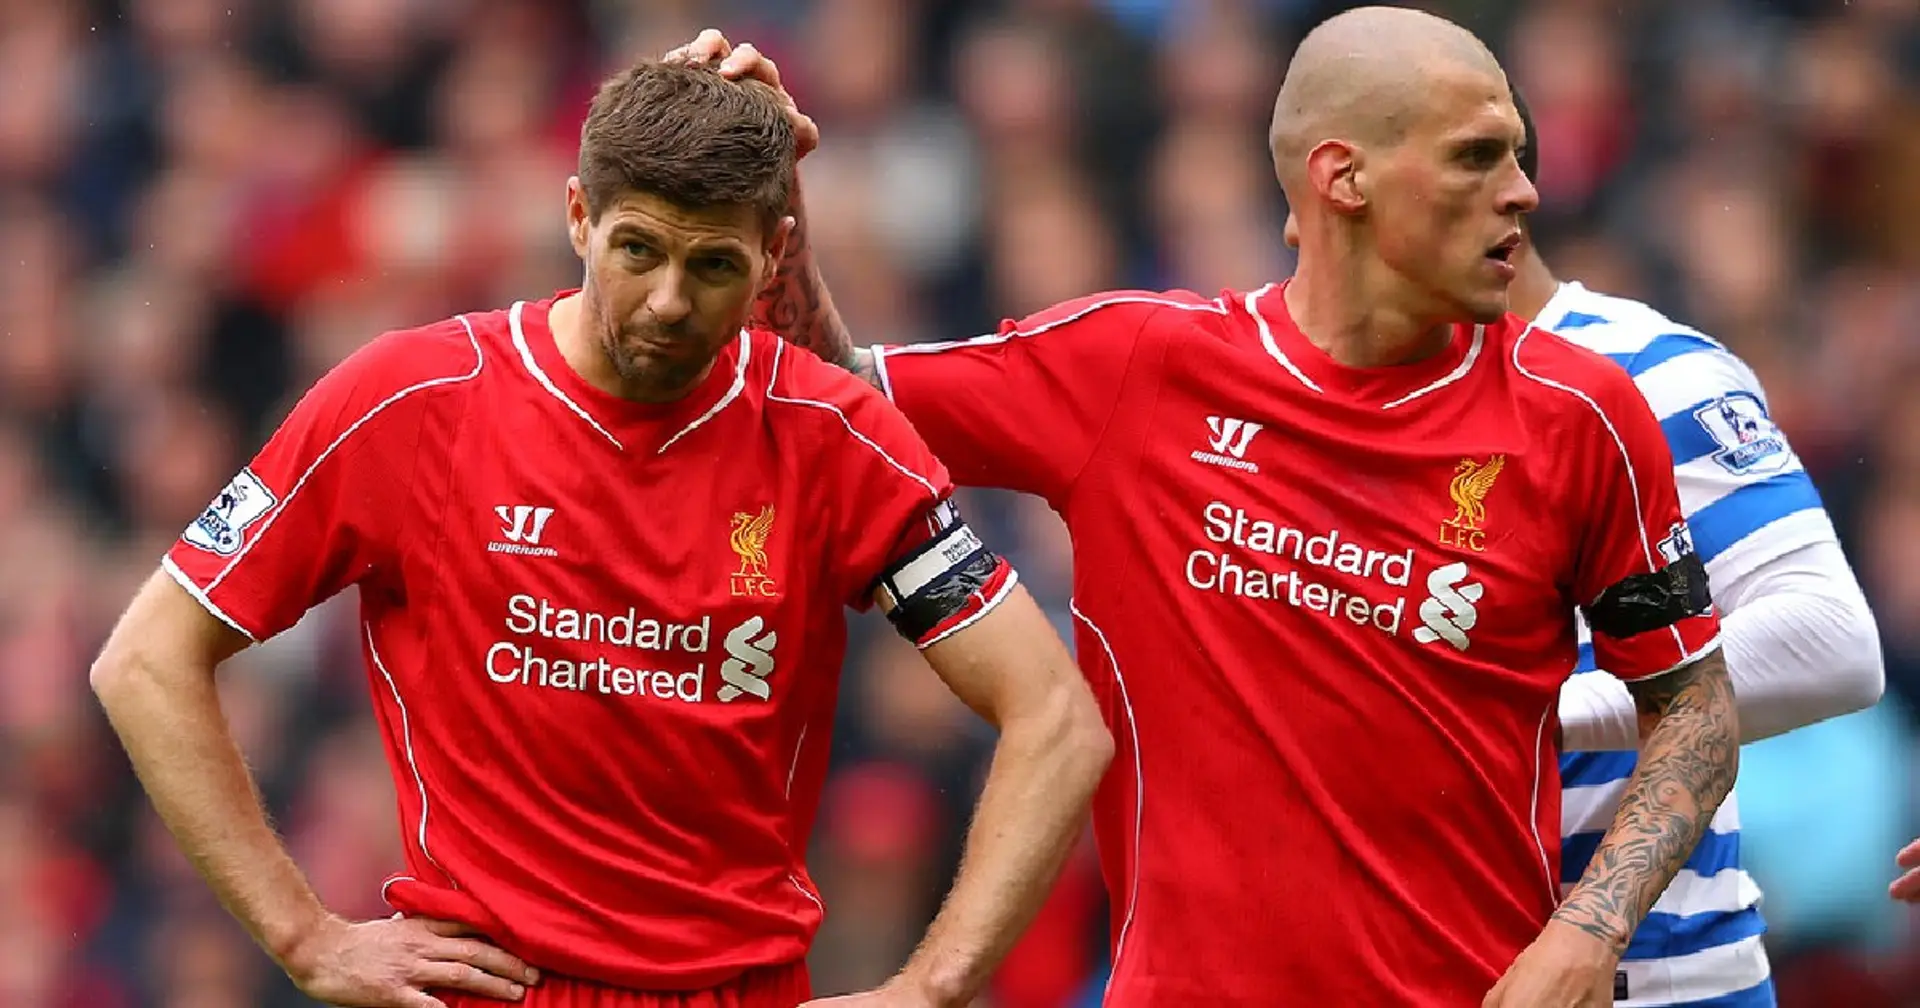 'One day when Jürgen Klopp or Liverpool decide to go a different way, he will be the one': Skrtel on Gerrard